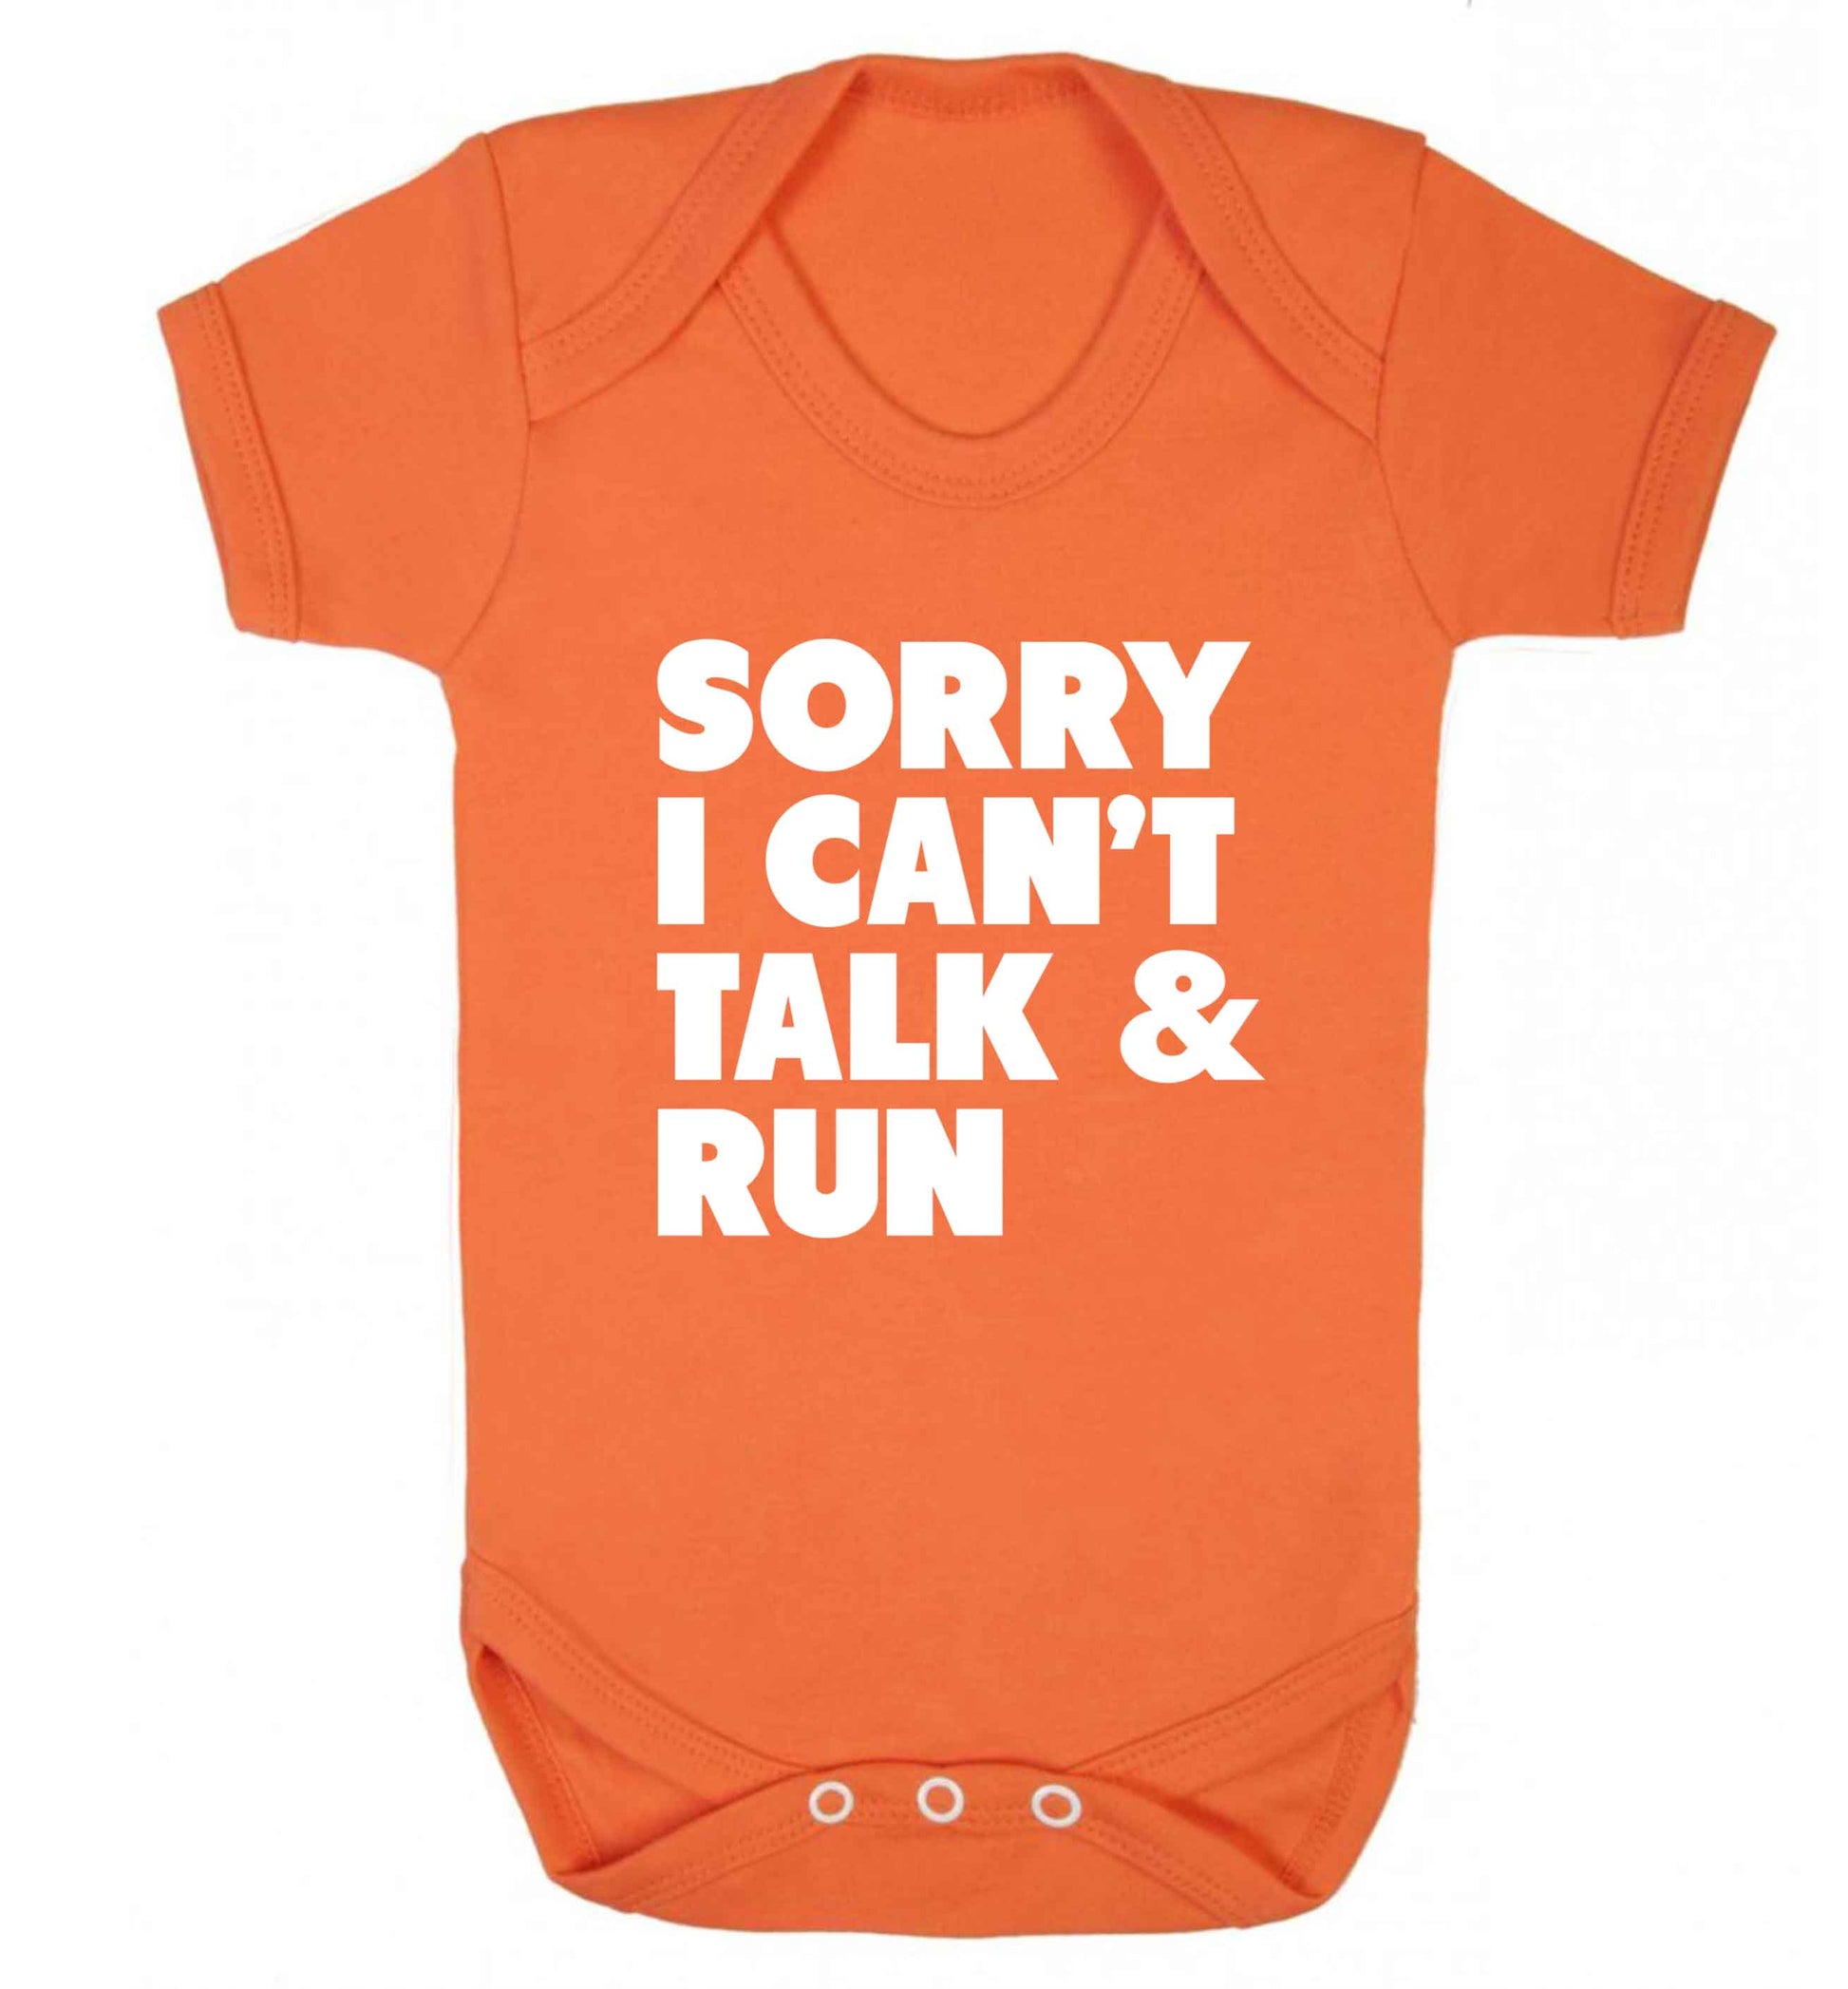 Sorry I can't talk and run baby vest orange 18-24 months